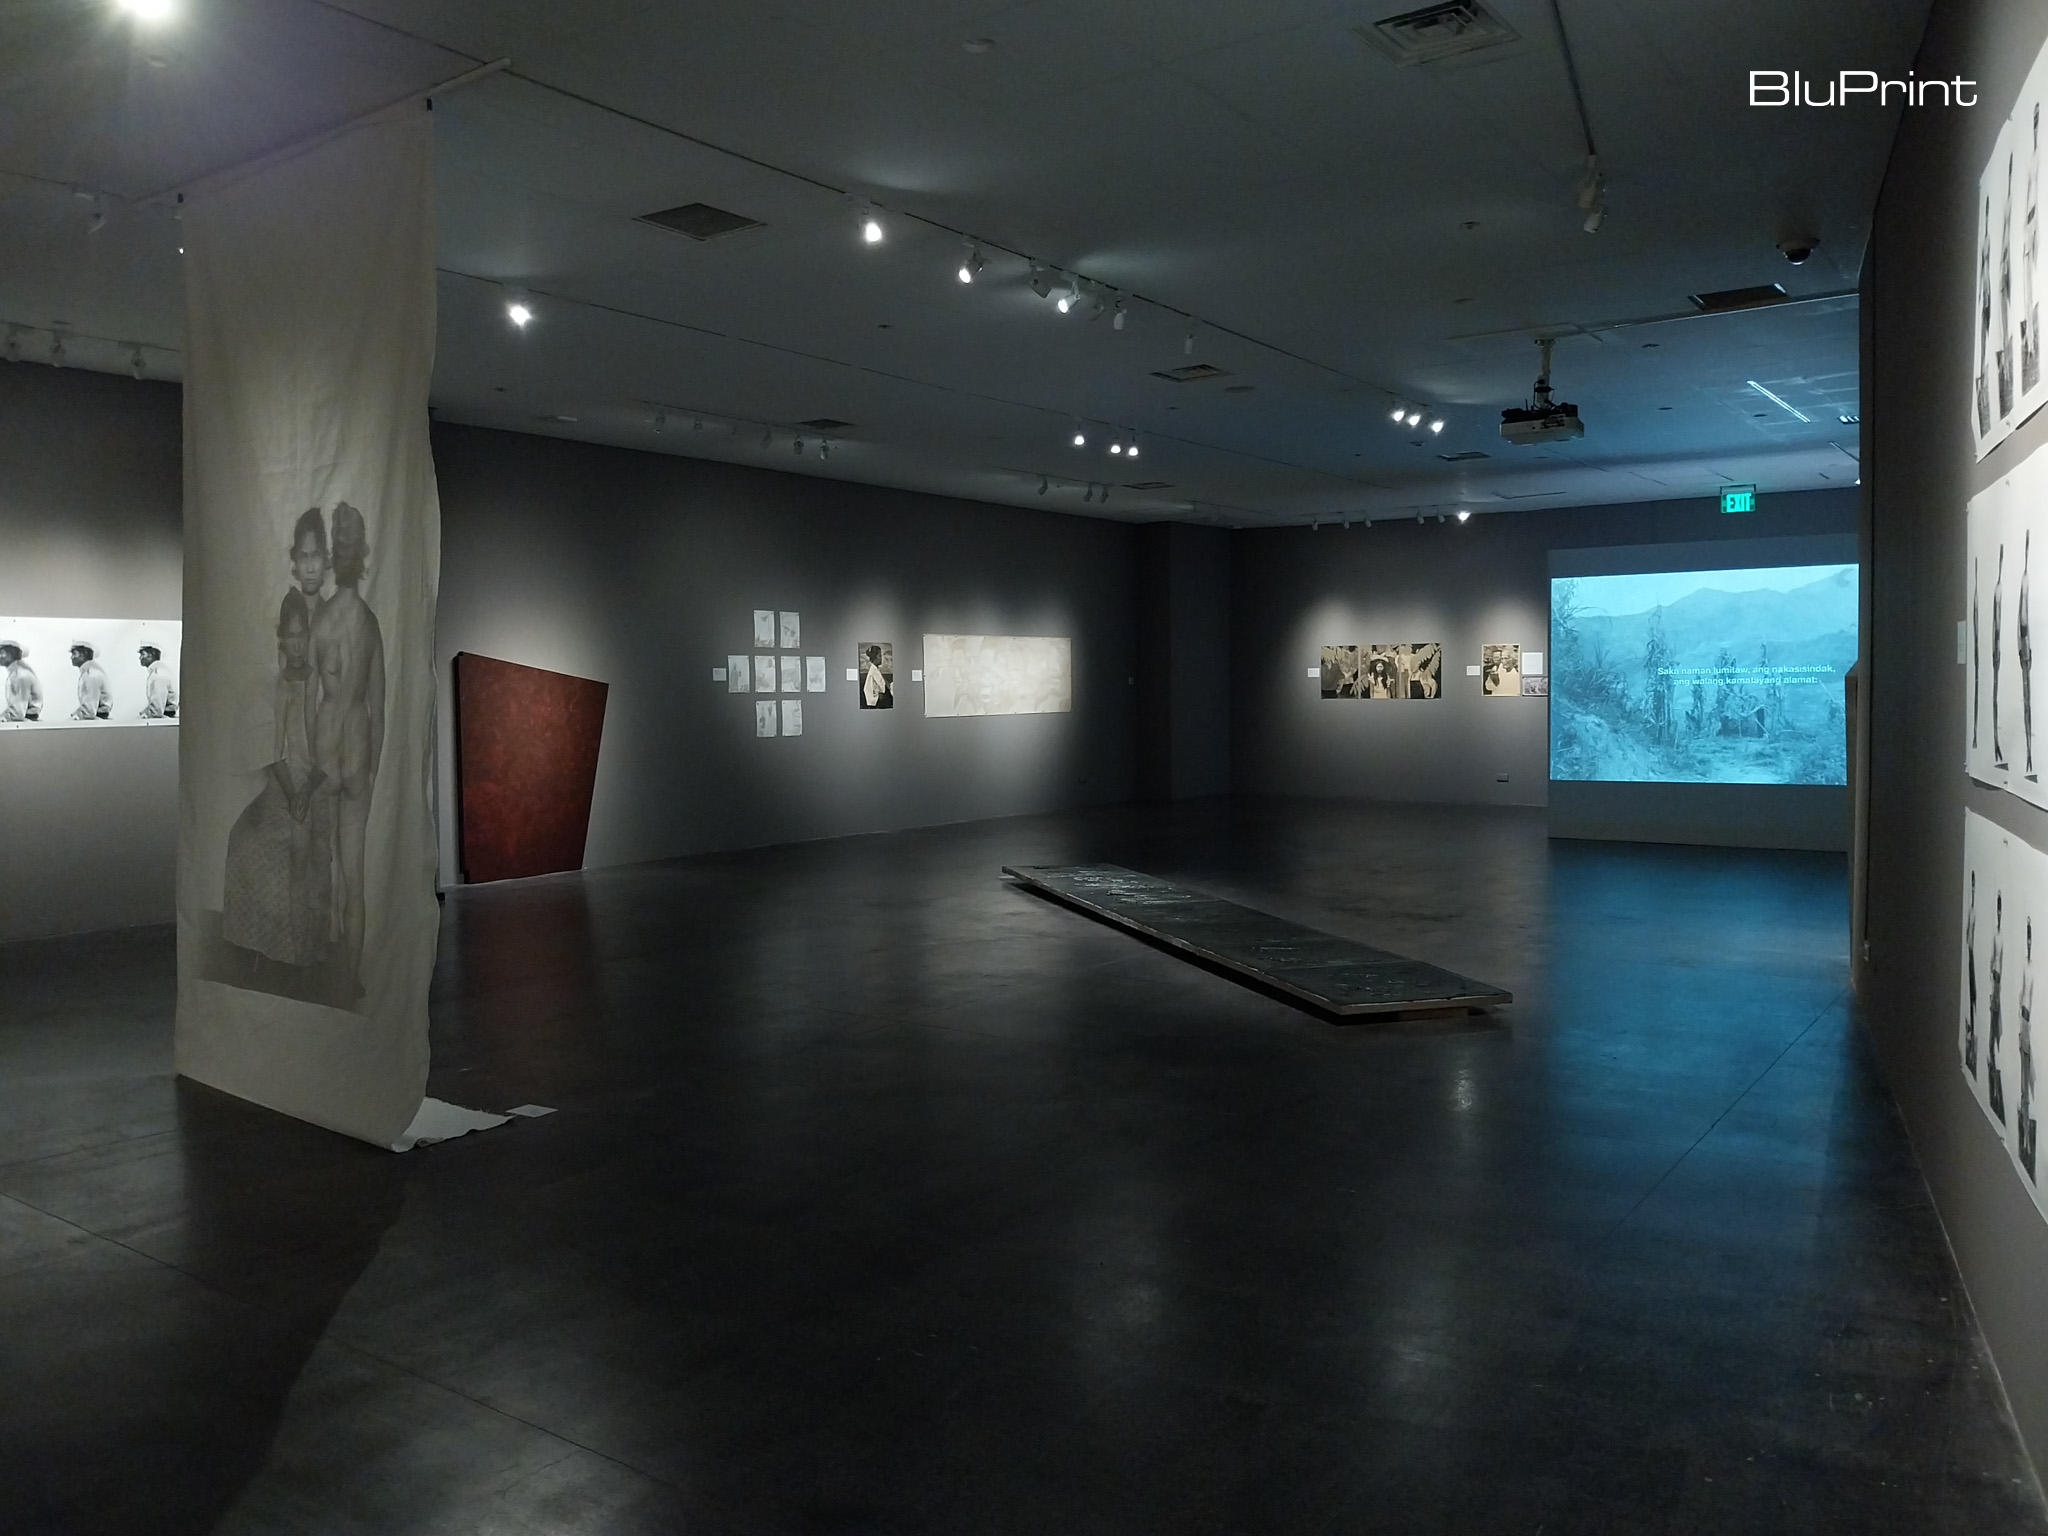 Wide view of the "Snare for Birds" exhibit at the Ateneo Art Gallery. Photo by Patricia F. Yap.